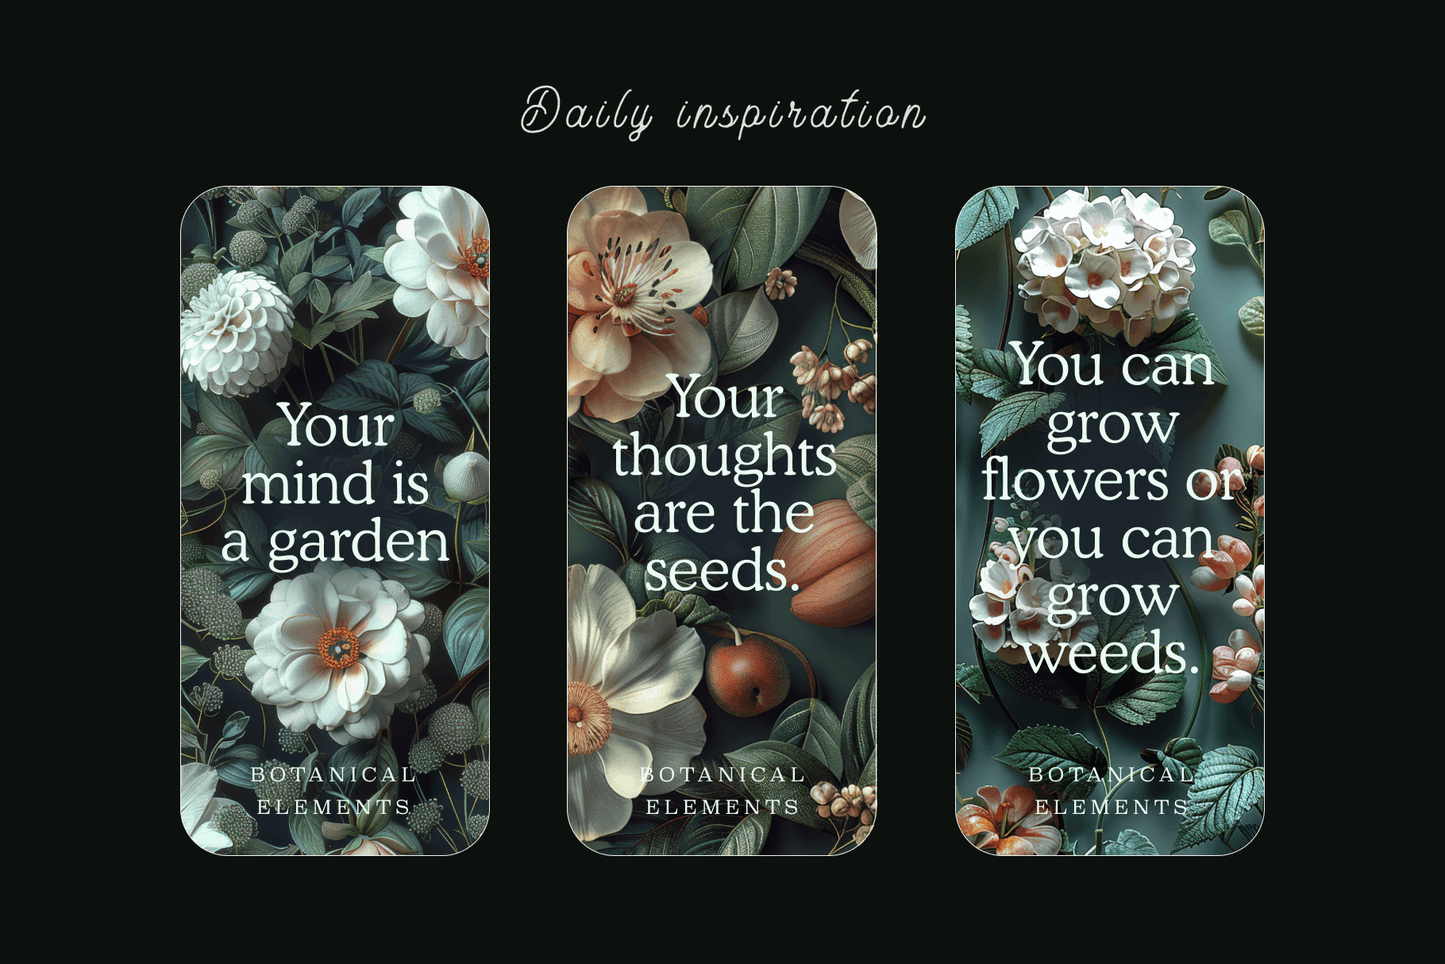 A series of mindfulness quotes with botanical art